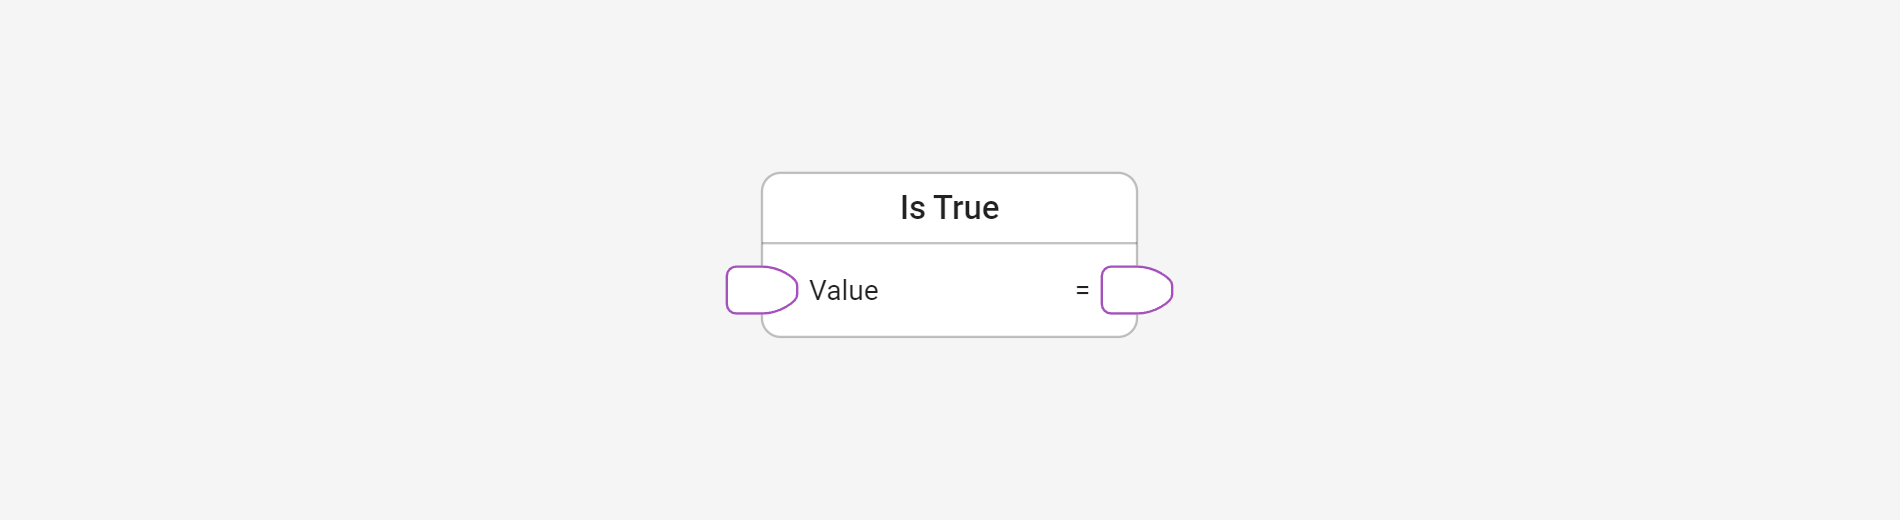 Check if a value is true